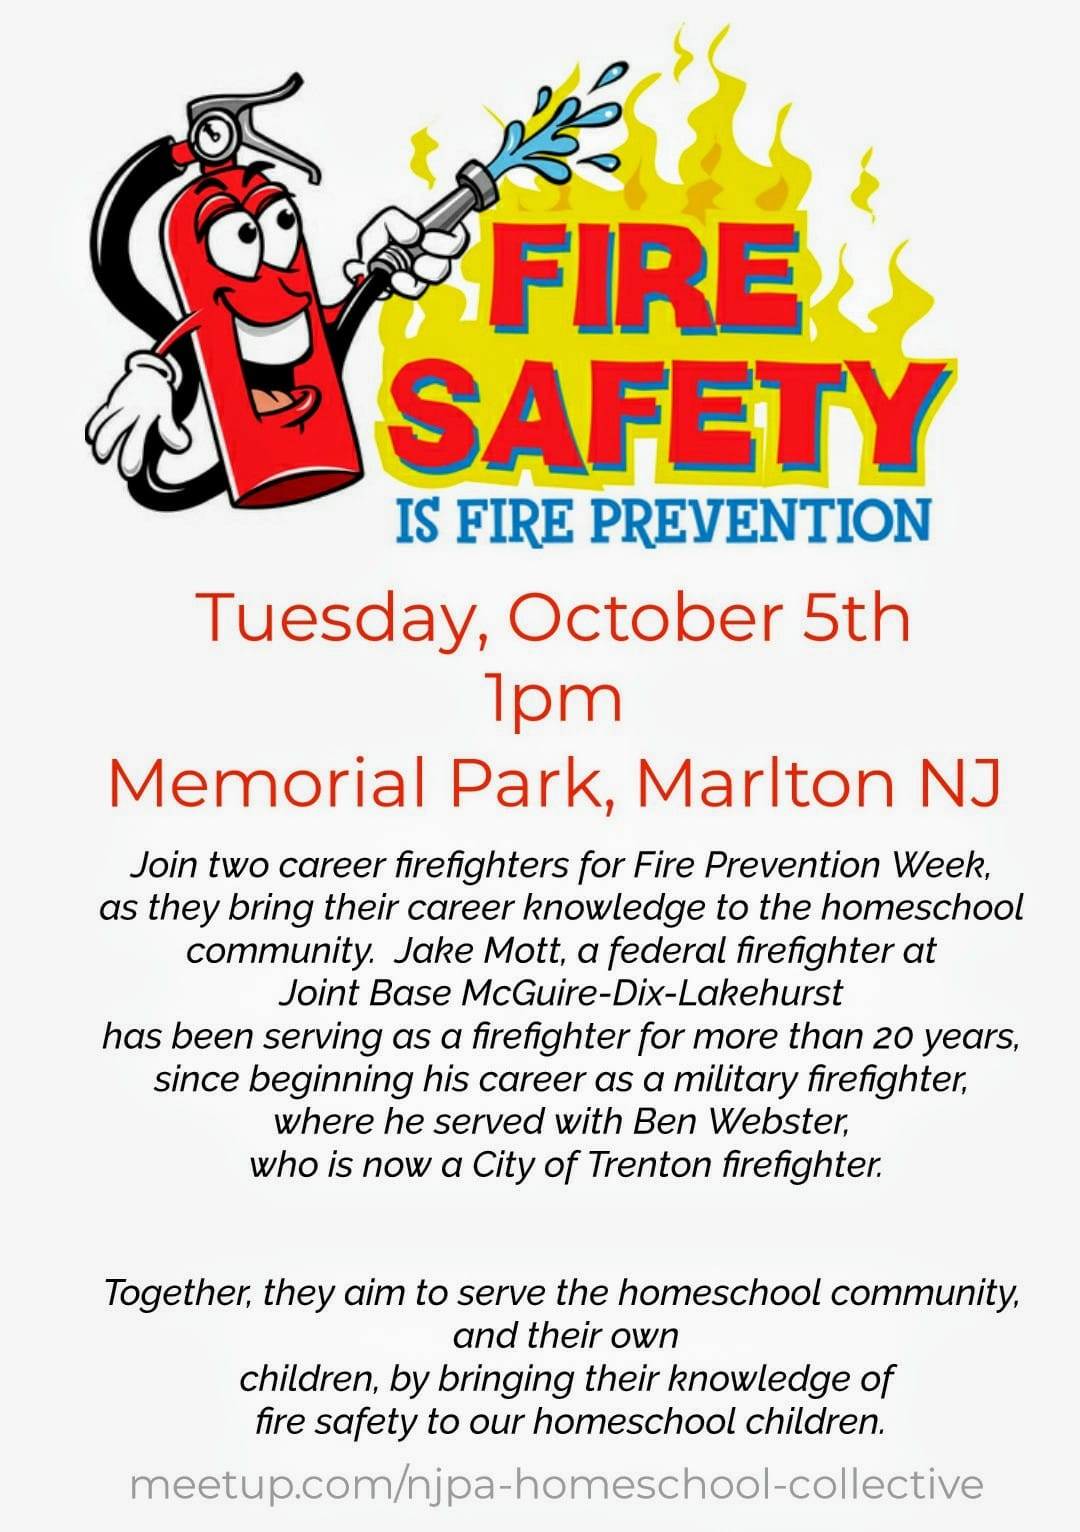 May be an image of text that says 'FIRE SAFETY IS FIRE PREVENTION Tuesday, October 5th 1pm Memorial Park, Marlton NJ Join two career firefighters for Fire Prevention Week, as they bring their career knowledge to the homeschool community. Jake Mott, a federal firefighter at Joint Base McGuire-Dix-Lakehurst has been serving as a firefighter for more than 20 years, since beginning his career as a military firefighter, where he served with Ben Webster, who is now a City of Trenton firefighter. Together, they aim to serve the homeschool community, and their own children, by bringing their knowledge of fire safety to our homeschool children. meetupcom/hjp-homecholctive'